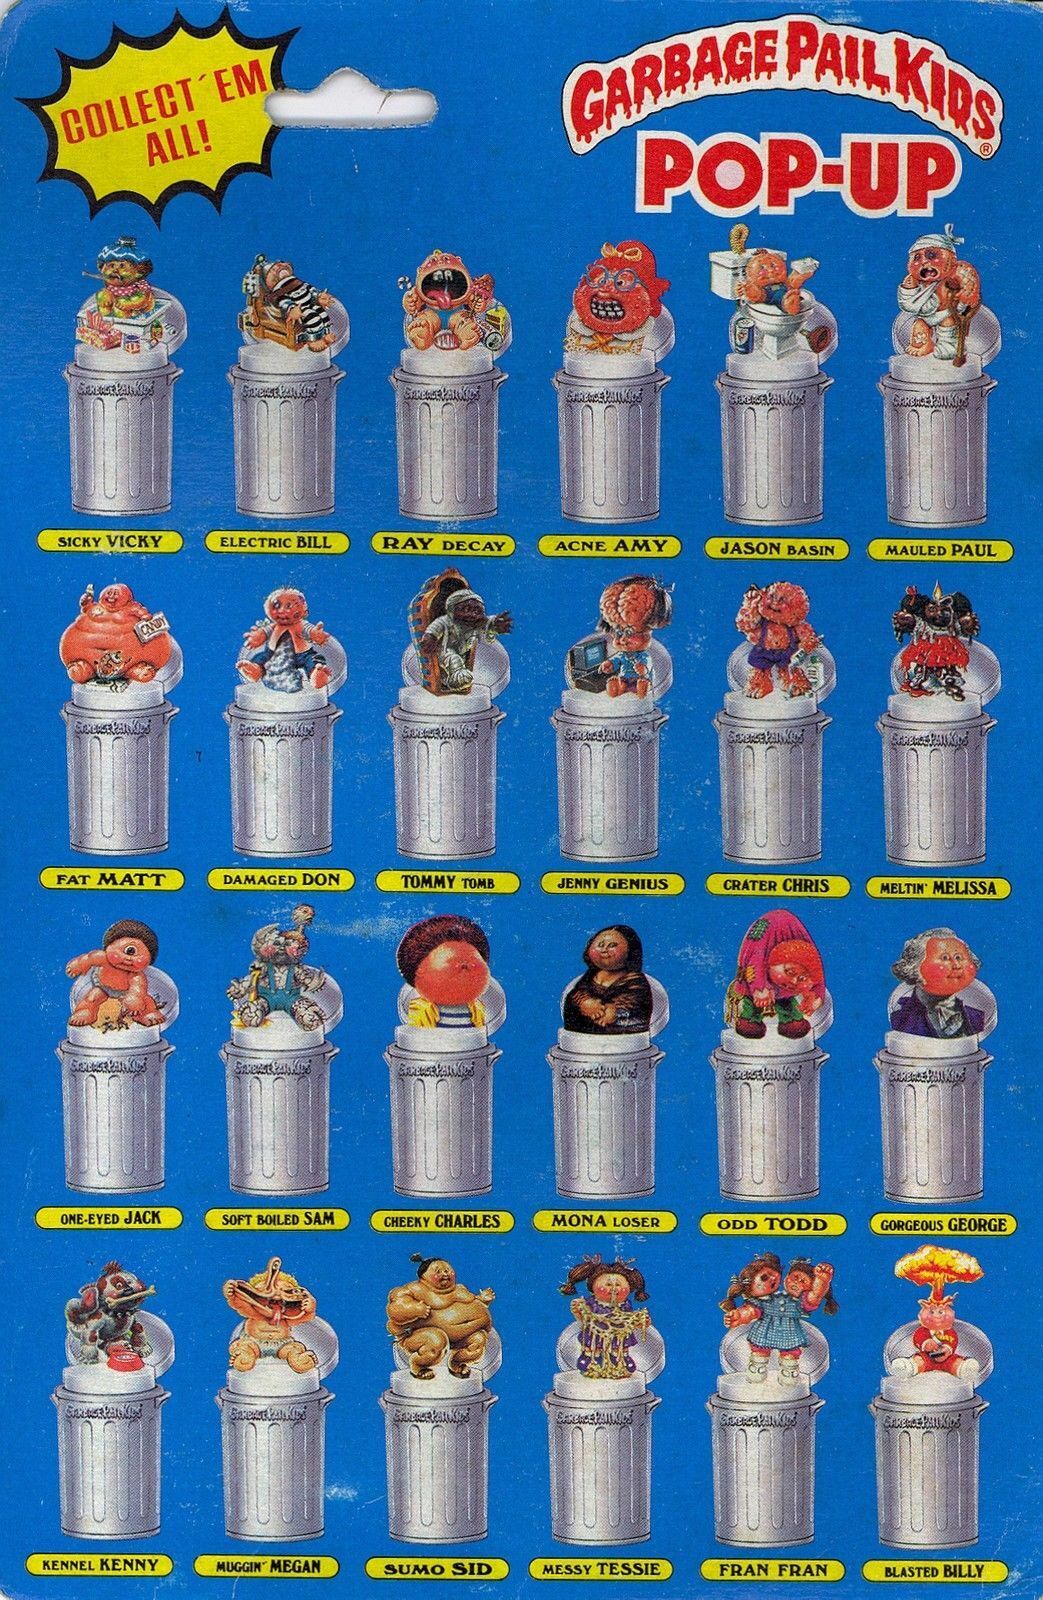 1985 Topps Imperial Toys GARBAGE PAIL KIDS CHEEKY CHARLES Pop-Up GPK Image 2